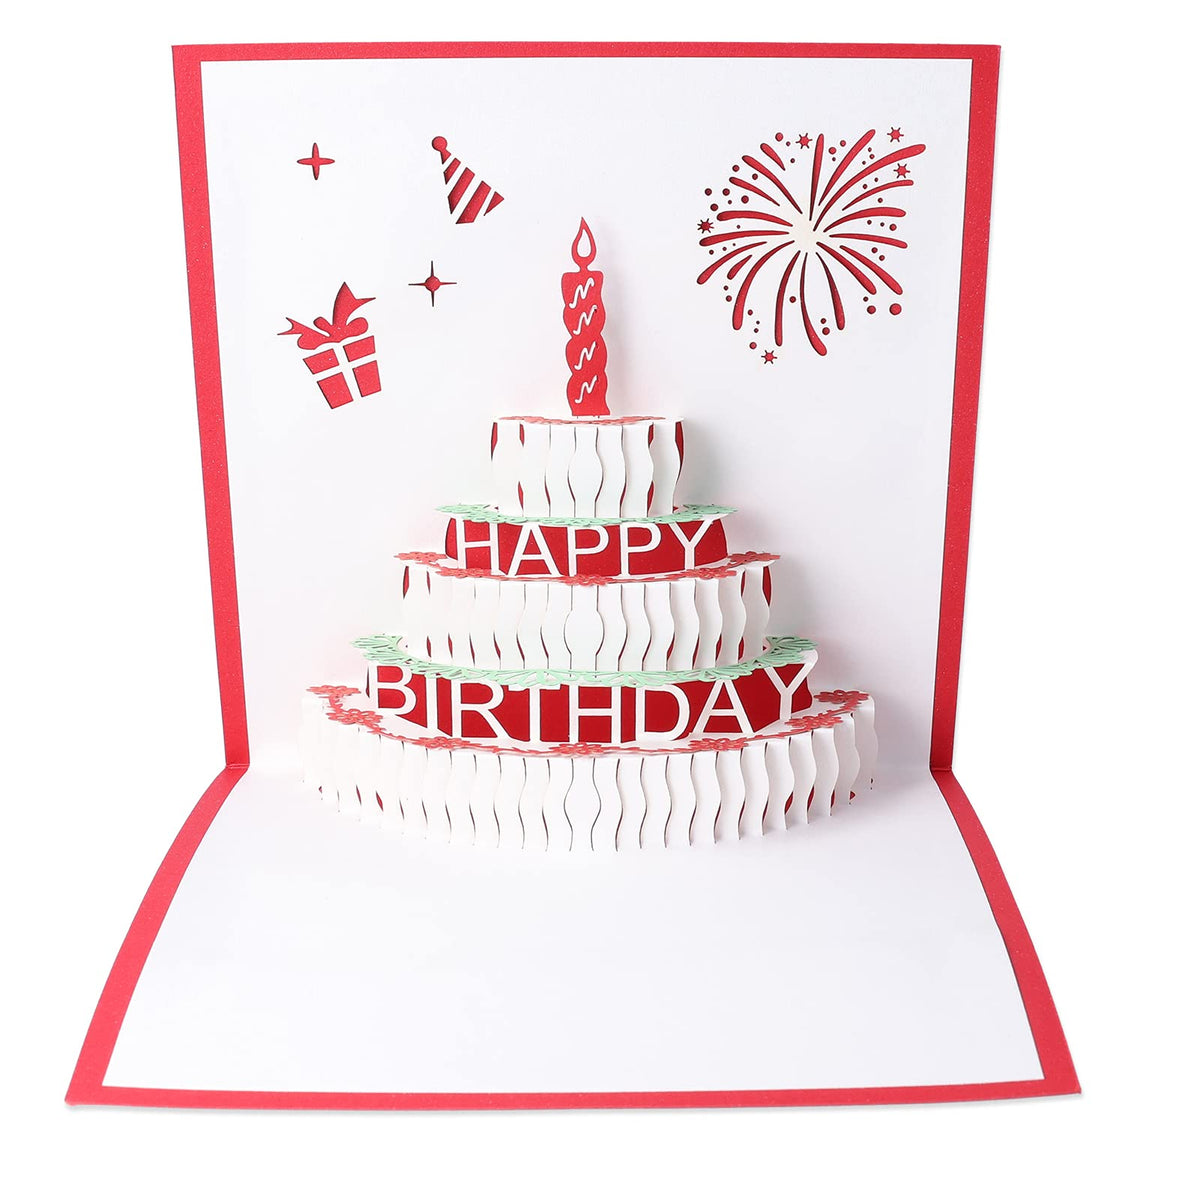 Adsispotg Happy Birthday Card, 3D Pop up Card, Recyclable Envelope Included, Carnival Birthday Greeting Card for Kids Women Mom Dad Wife Husband Business